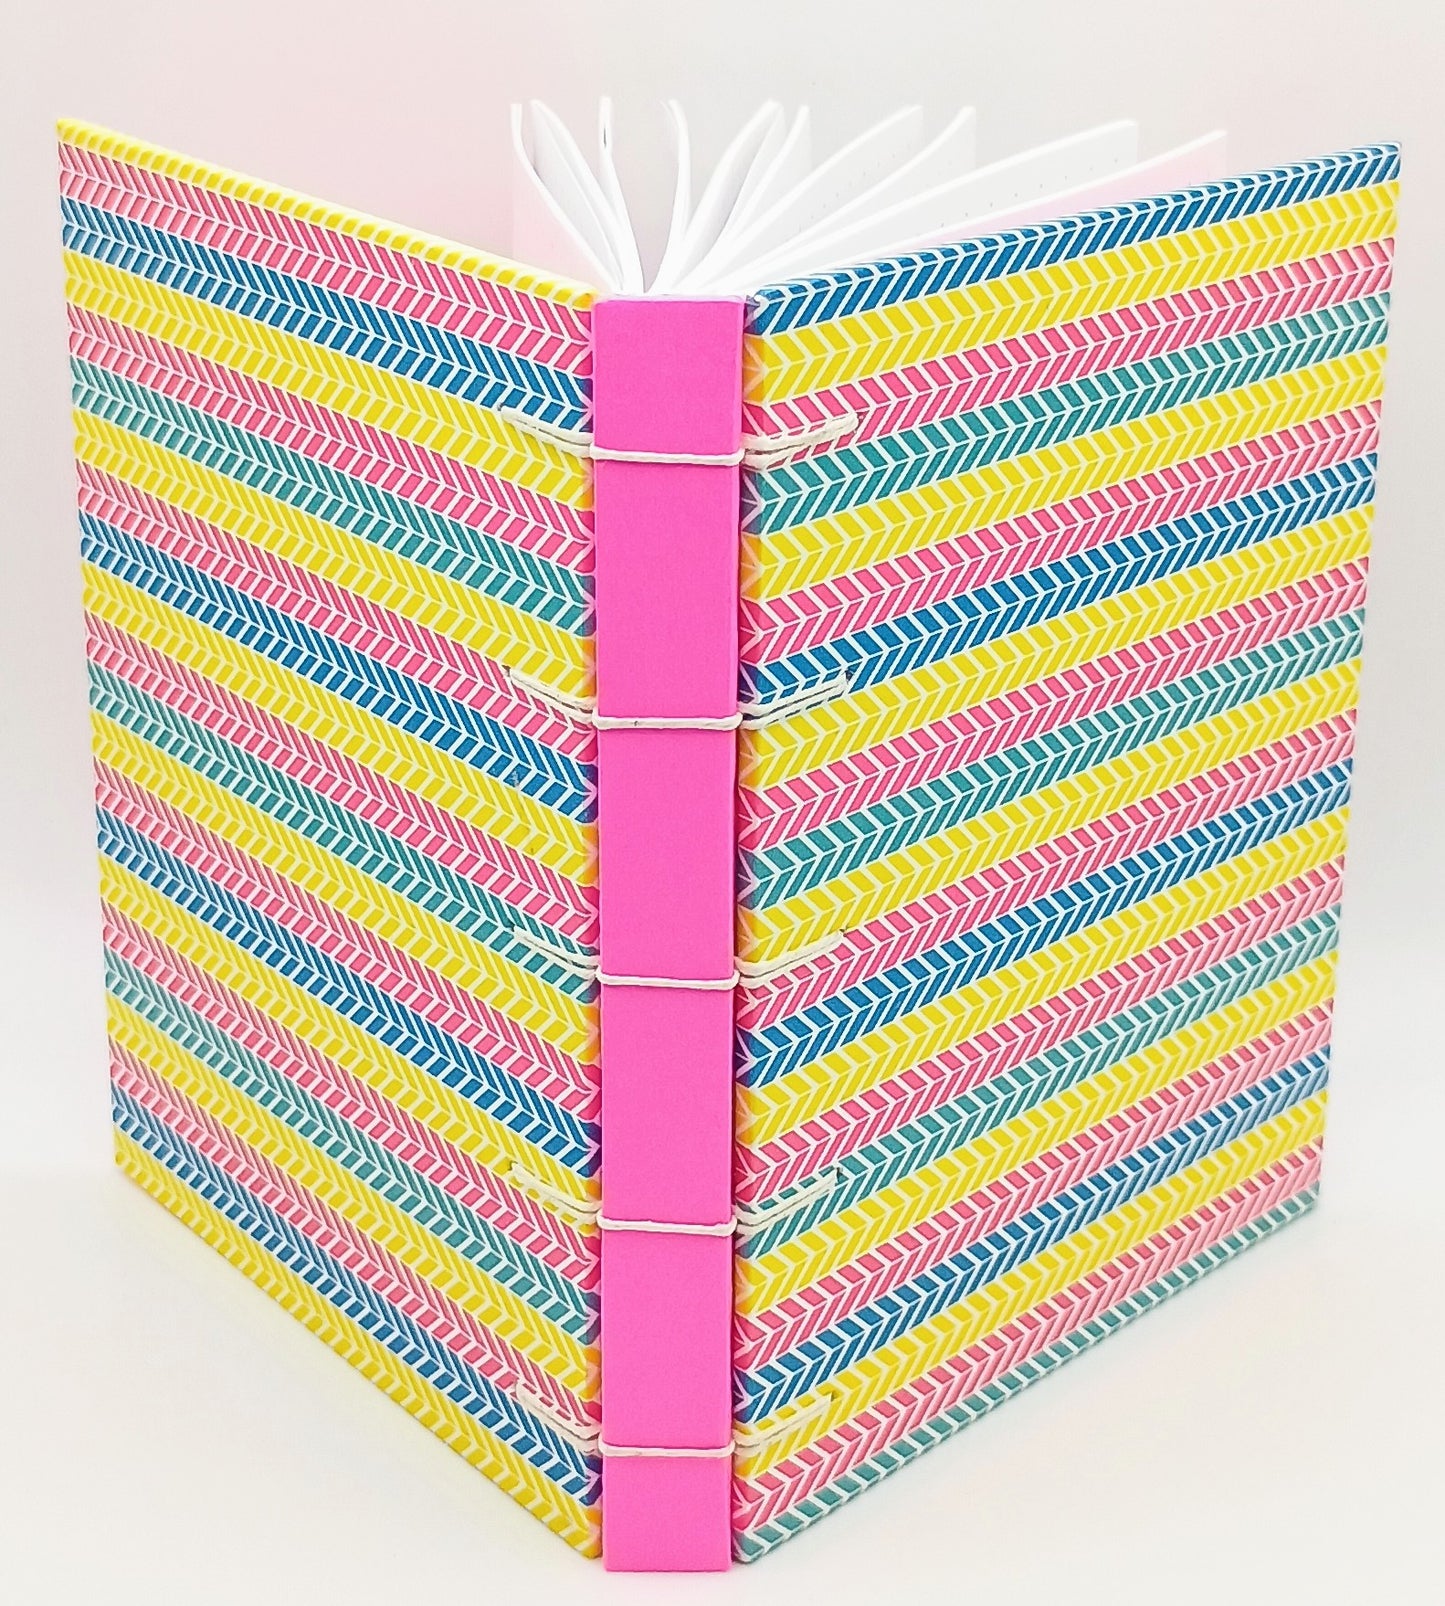 Small Secret Belgian Journal (Chevrons and Pink)